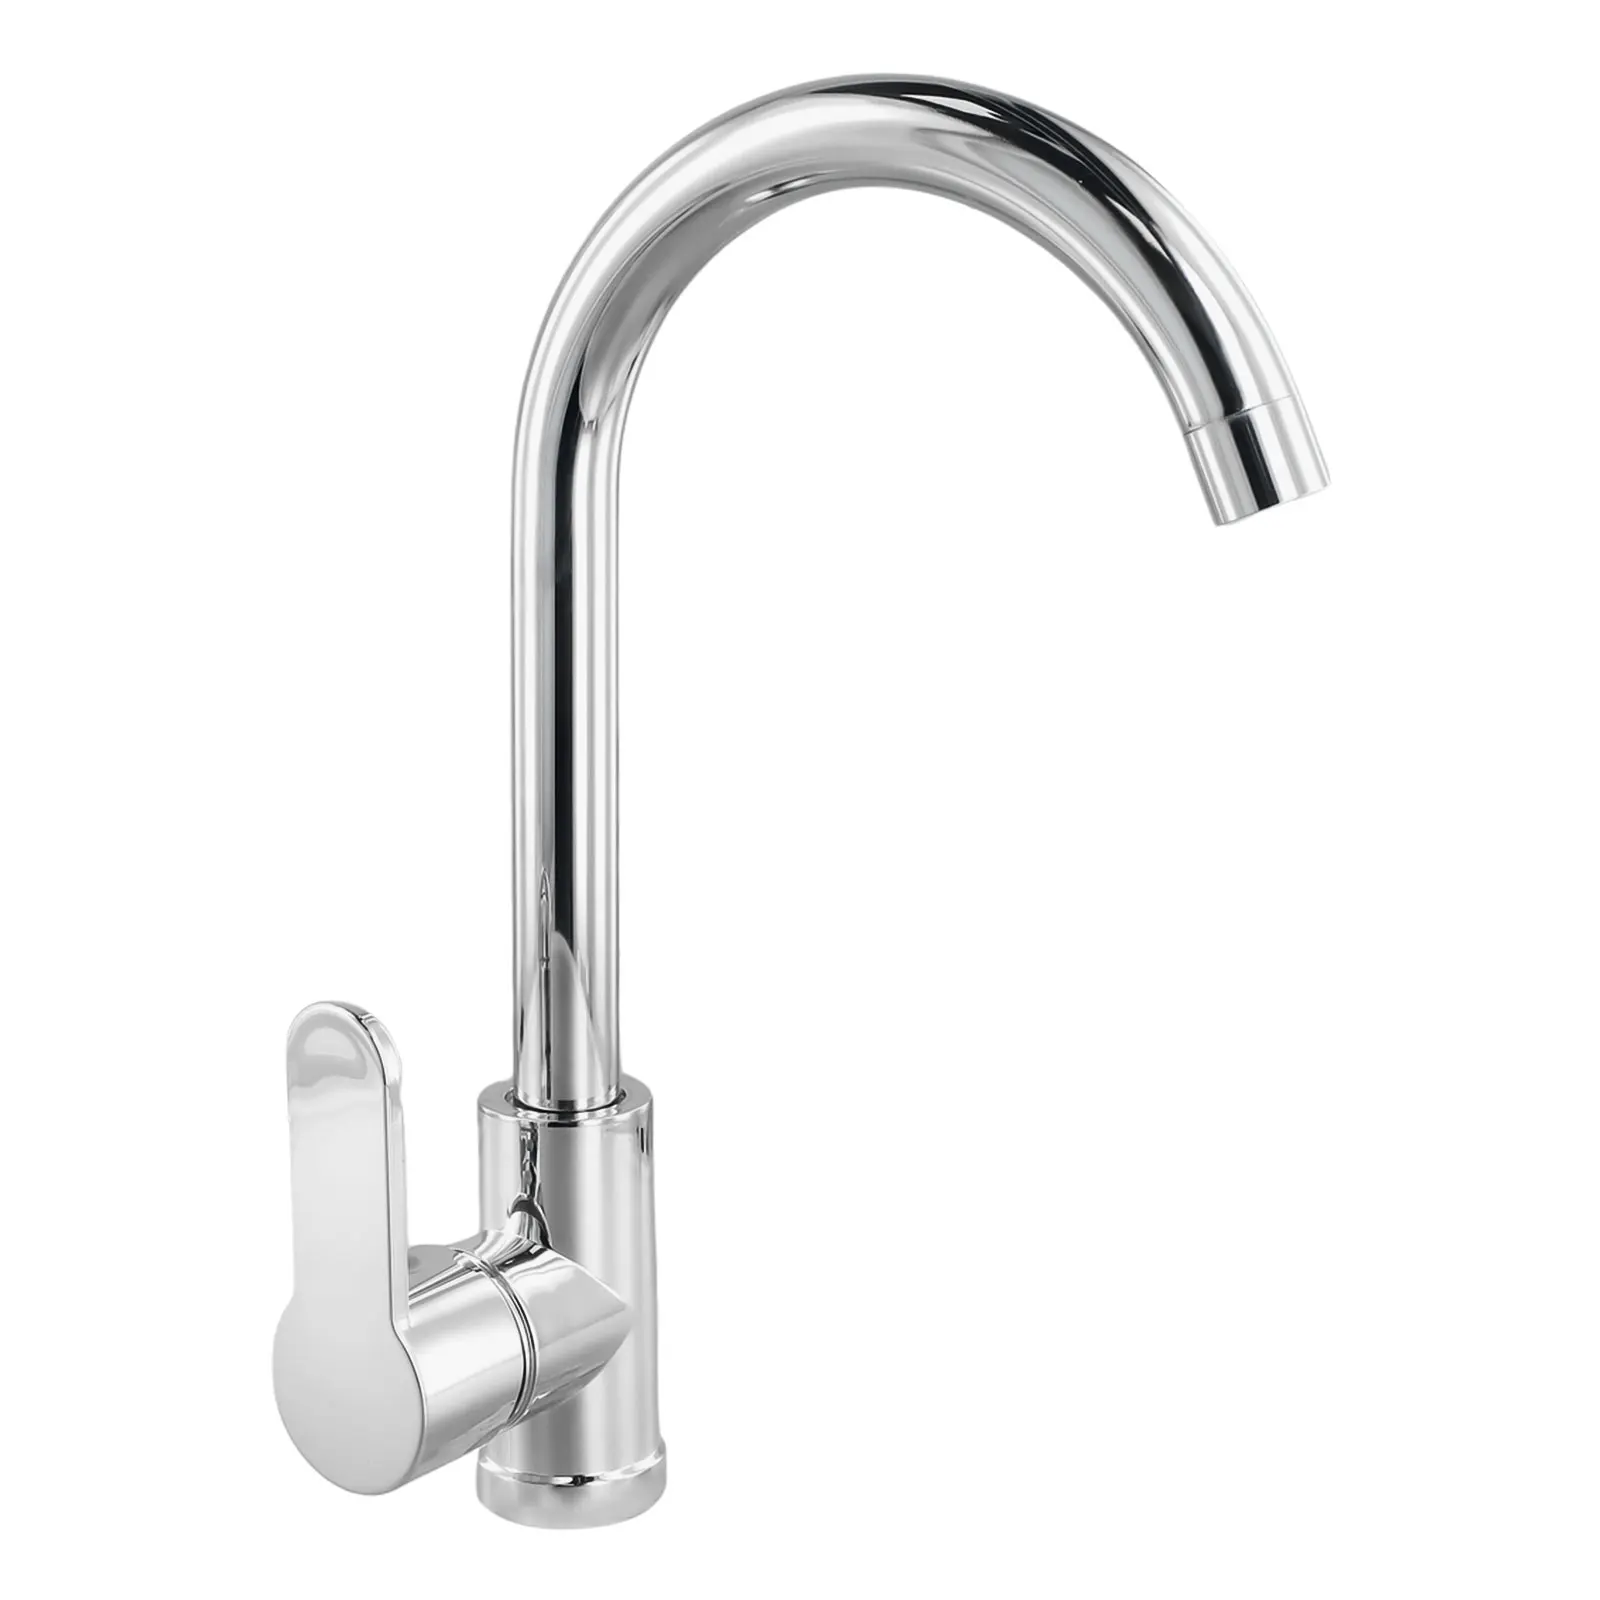 

Kitchen Faucet Stainless Steel Hot Cold Water Sink Mixer Tap Single Handle Water Taps 360 Degree Rotating Bathroom Basin Faucets